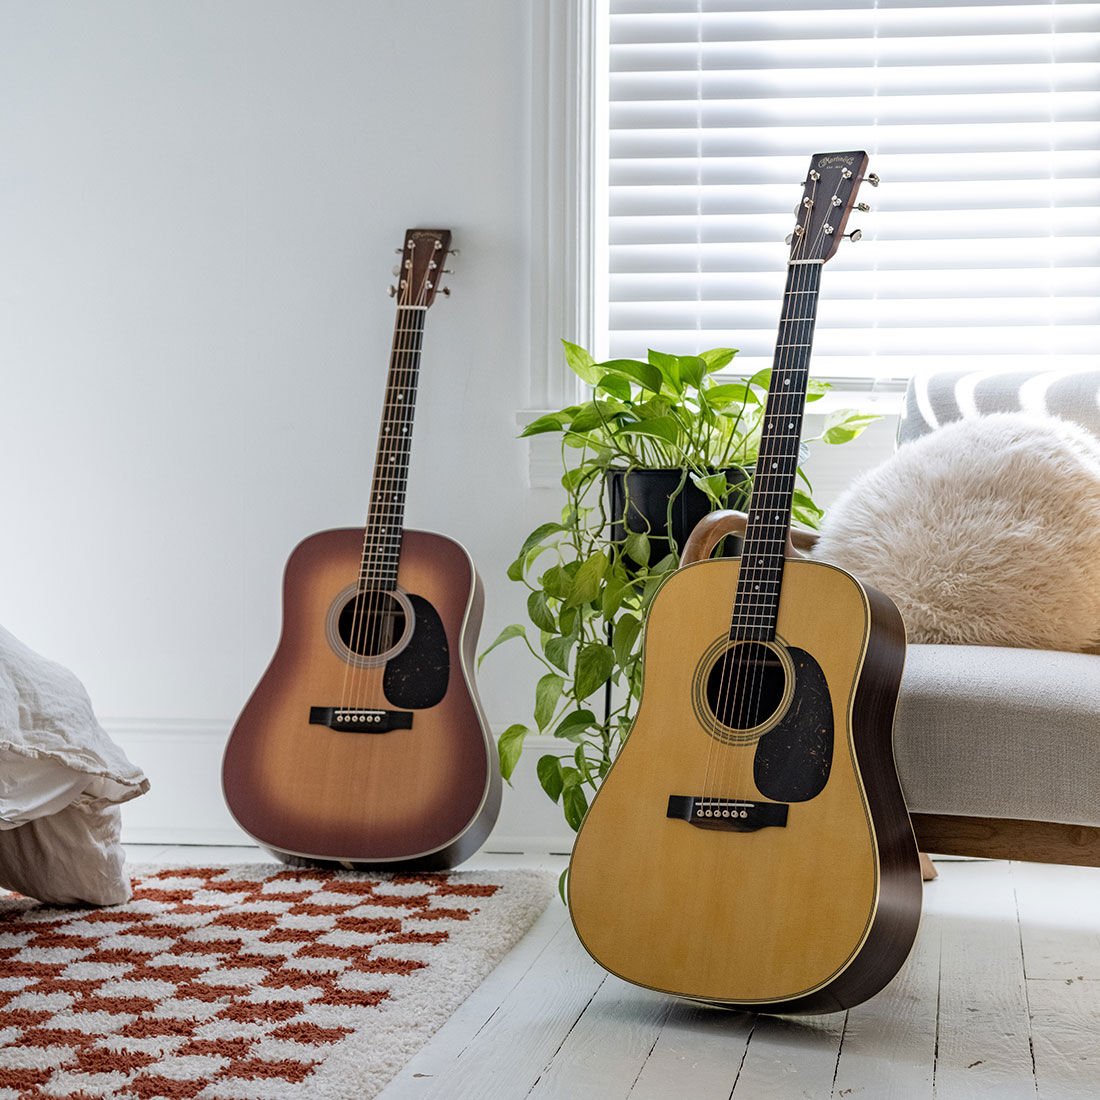 Two acoustic guitars sitting upright on a white floor